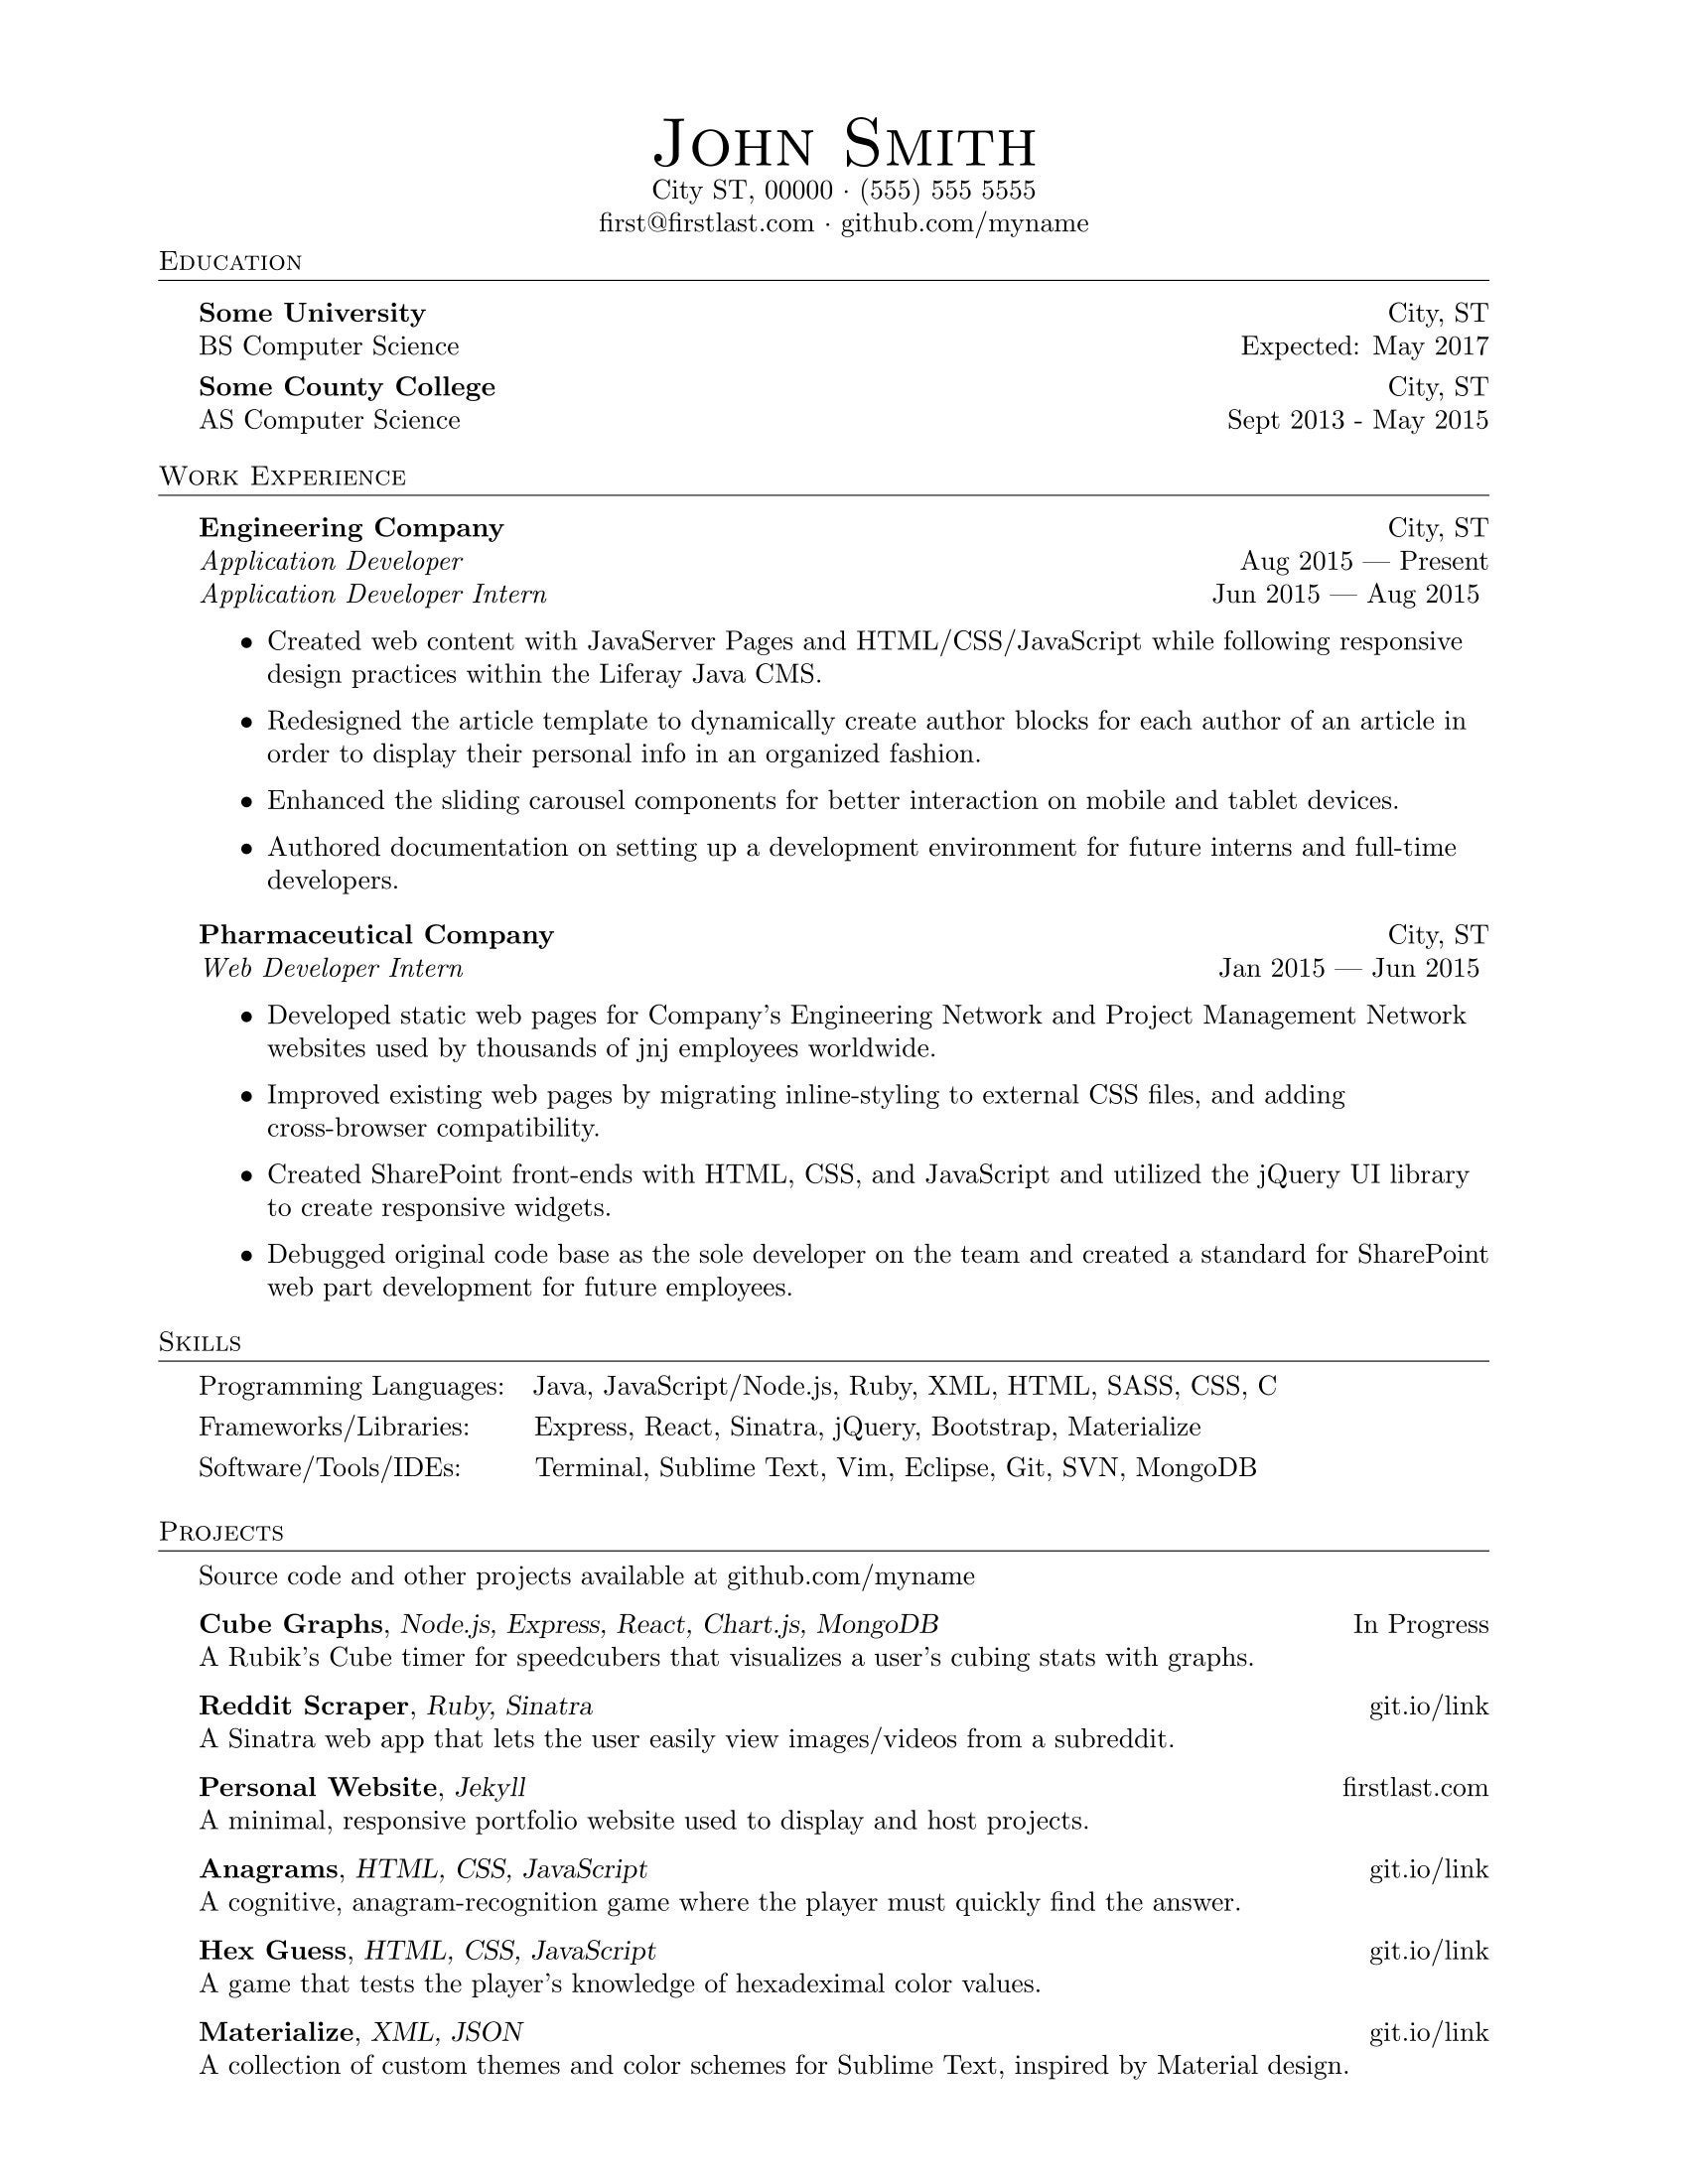 Sample Resume for Computer Science Fresh Graduate Reddit Computer Science Resume (junior In College) : R/resumes